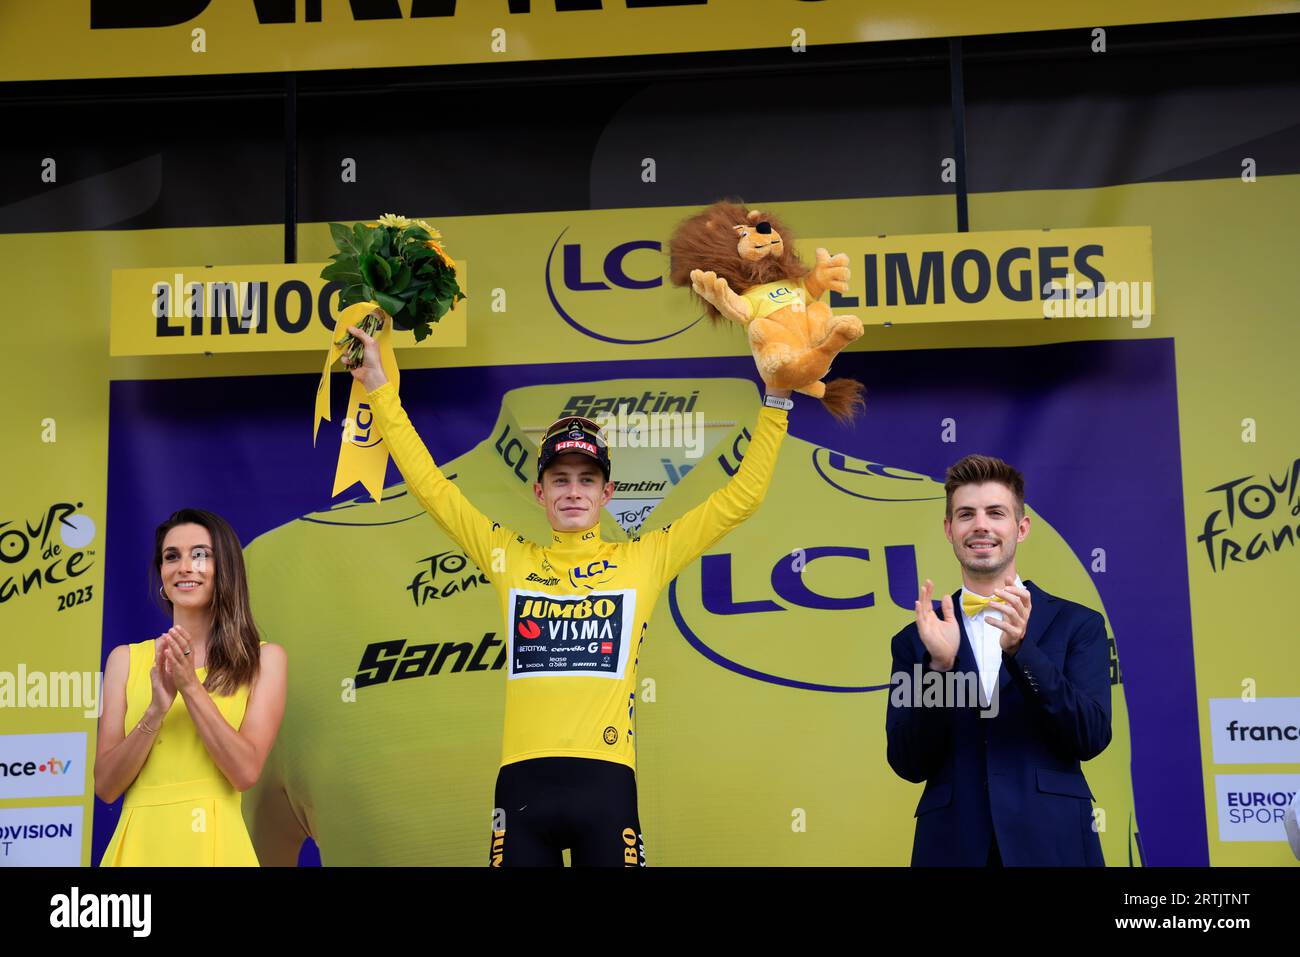 Jonas Vingegaard yellow jersey at the finish of the 8th Libourne Limoges stage of the 2023 cycling Tour de France. Climbing onto the podium in Limoges Stock Photo